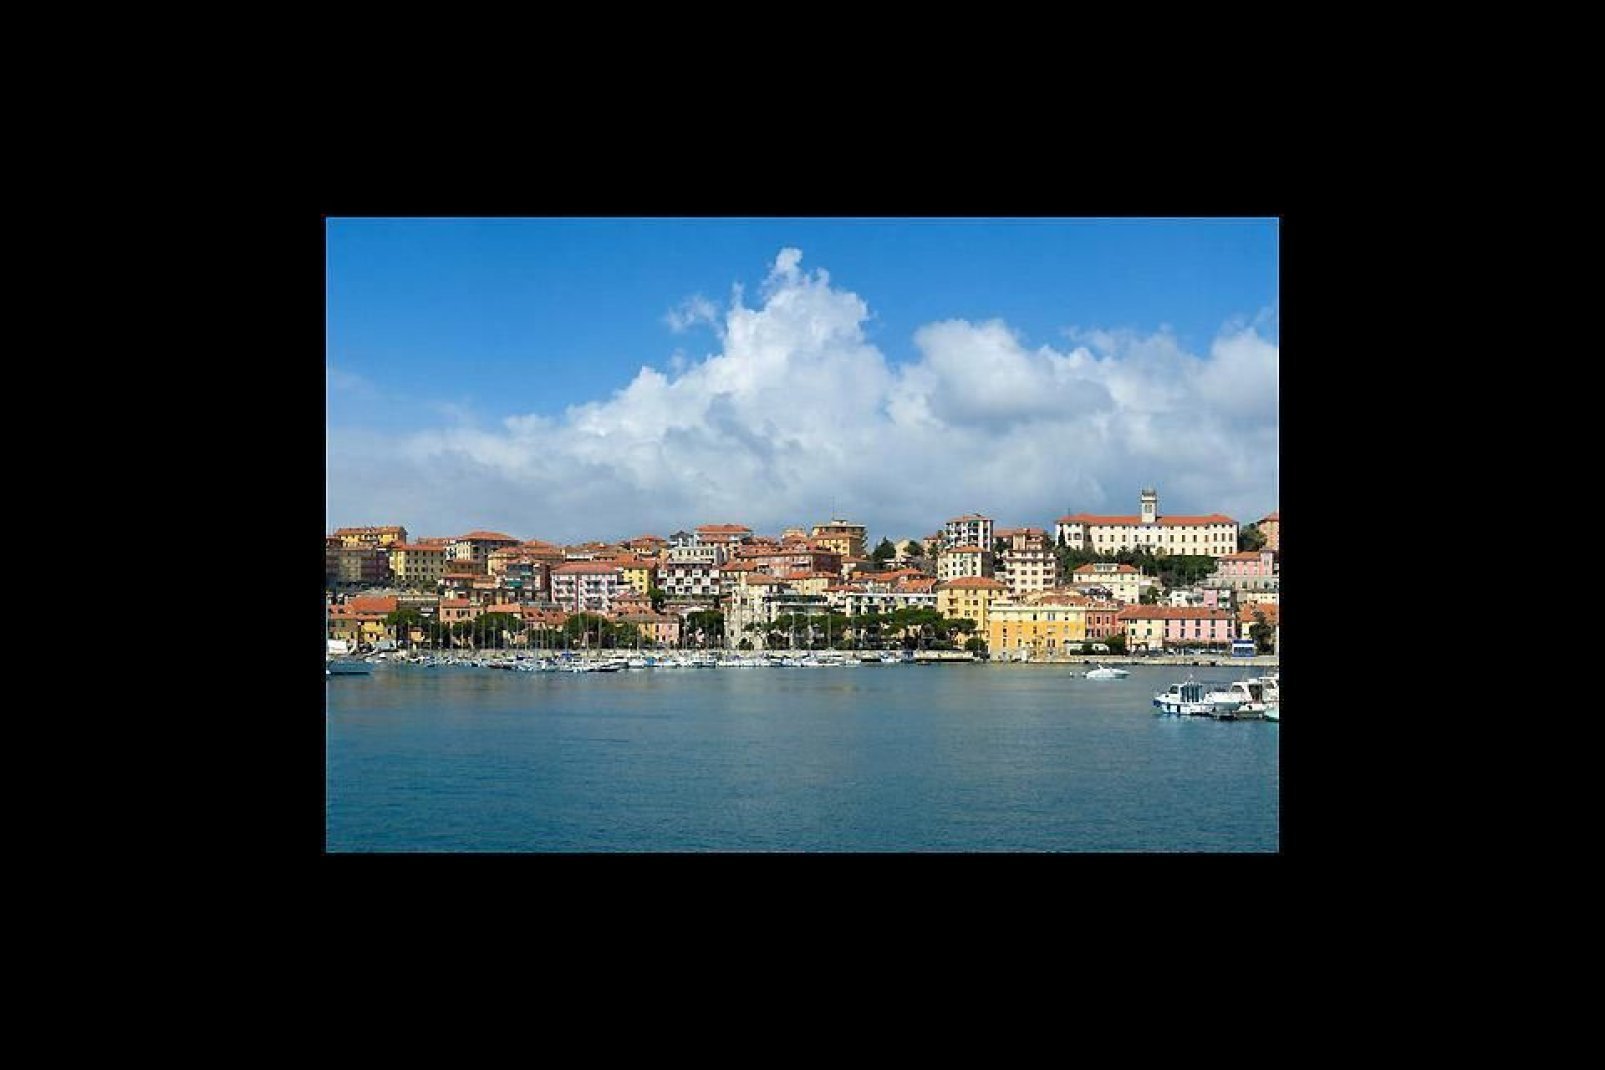 Imperia benefits from an excellent location on the famous Riviera dei Fiori, the coast that stretches from Capo Cervo to the French border